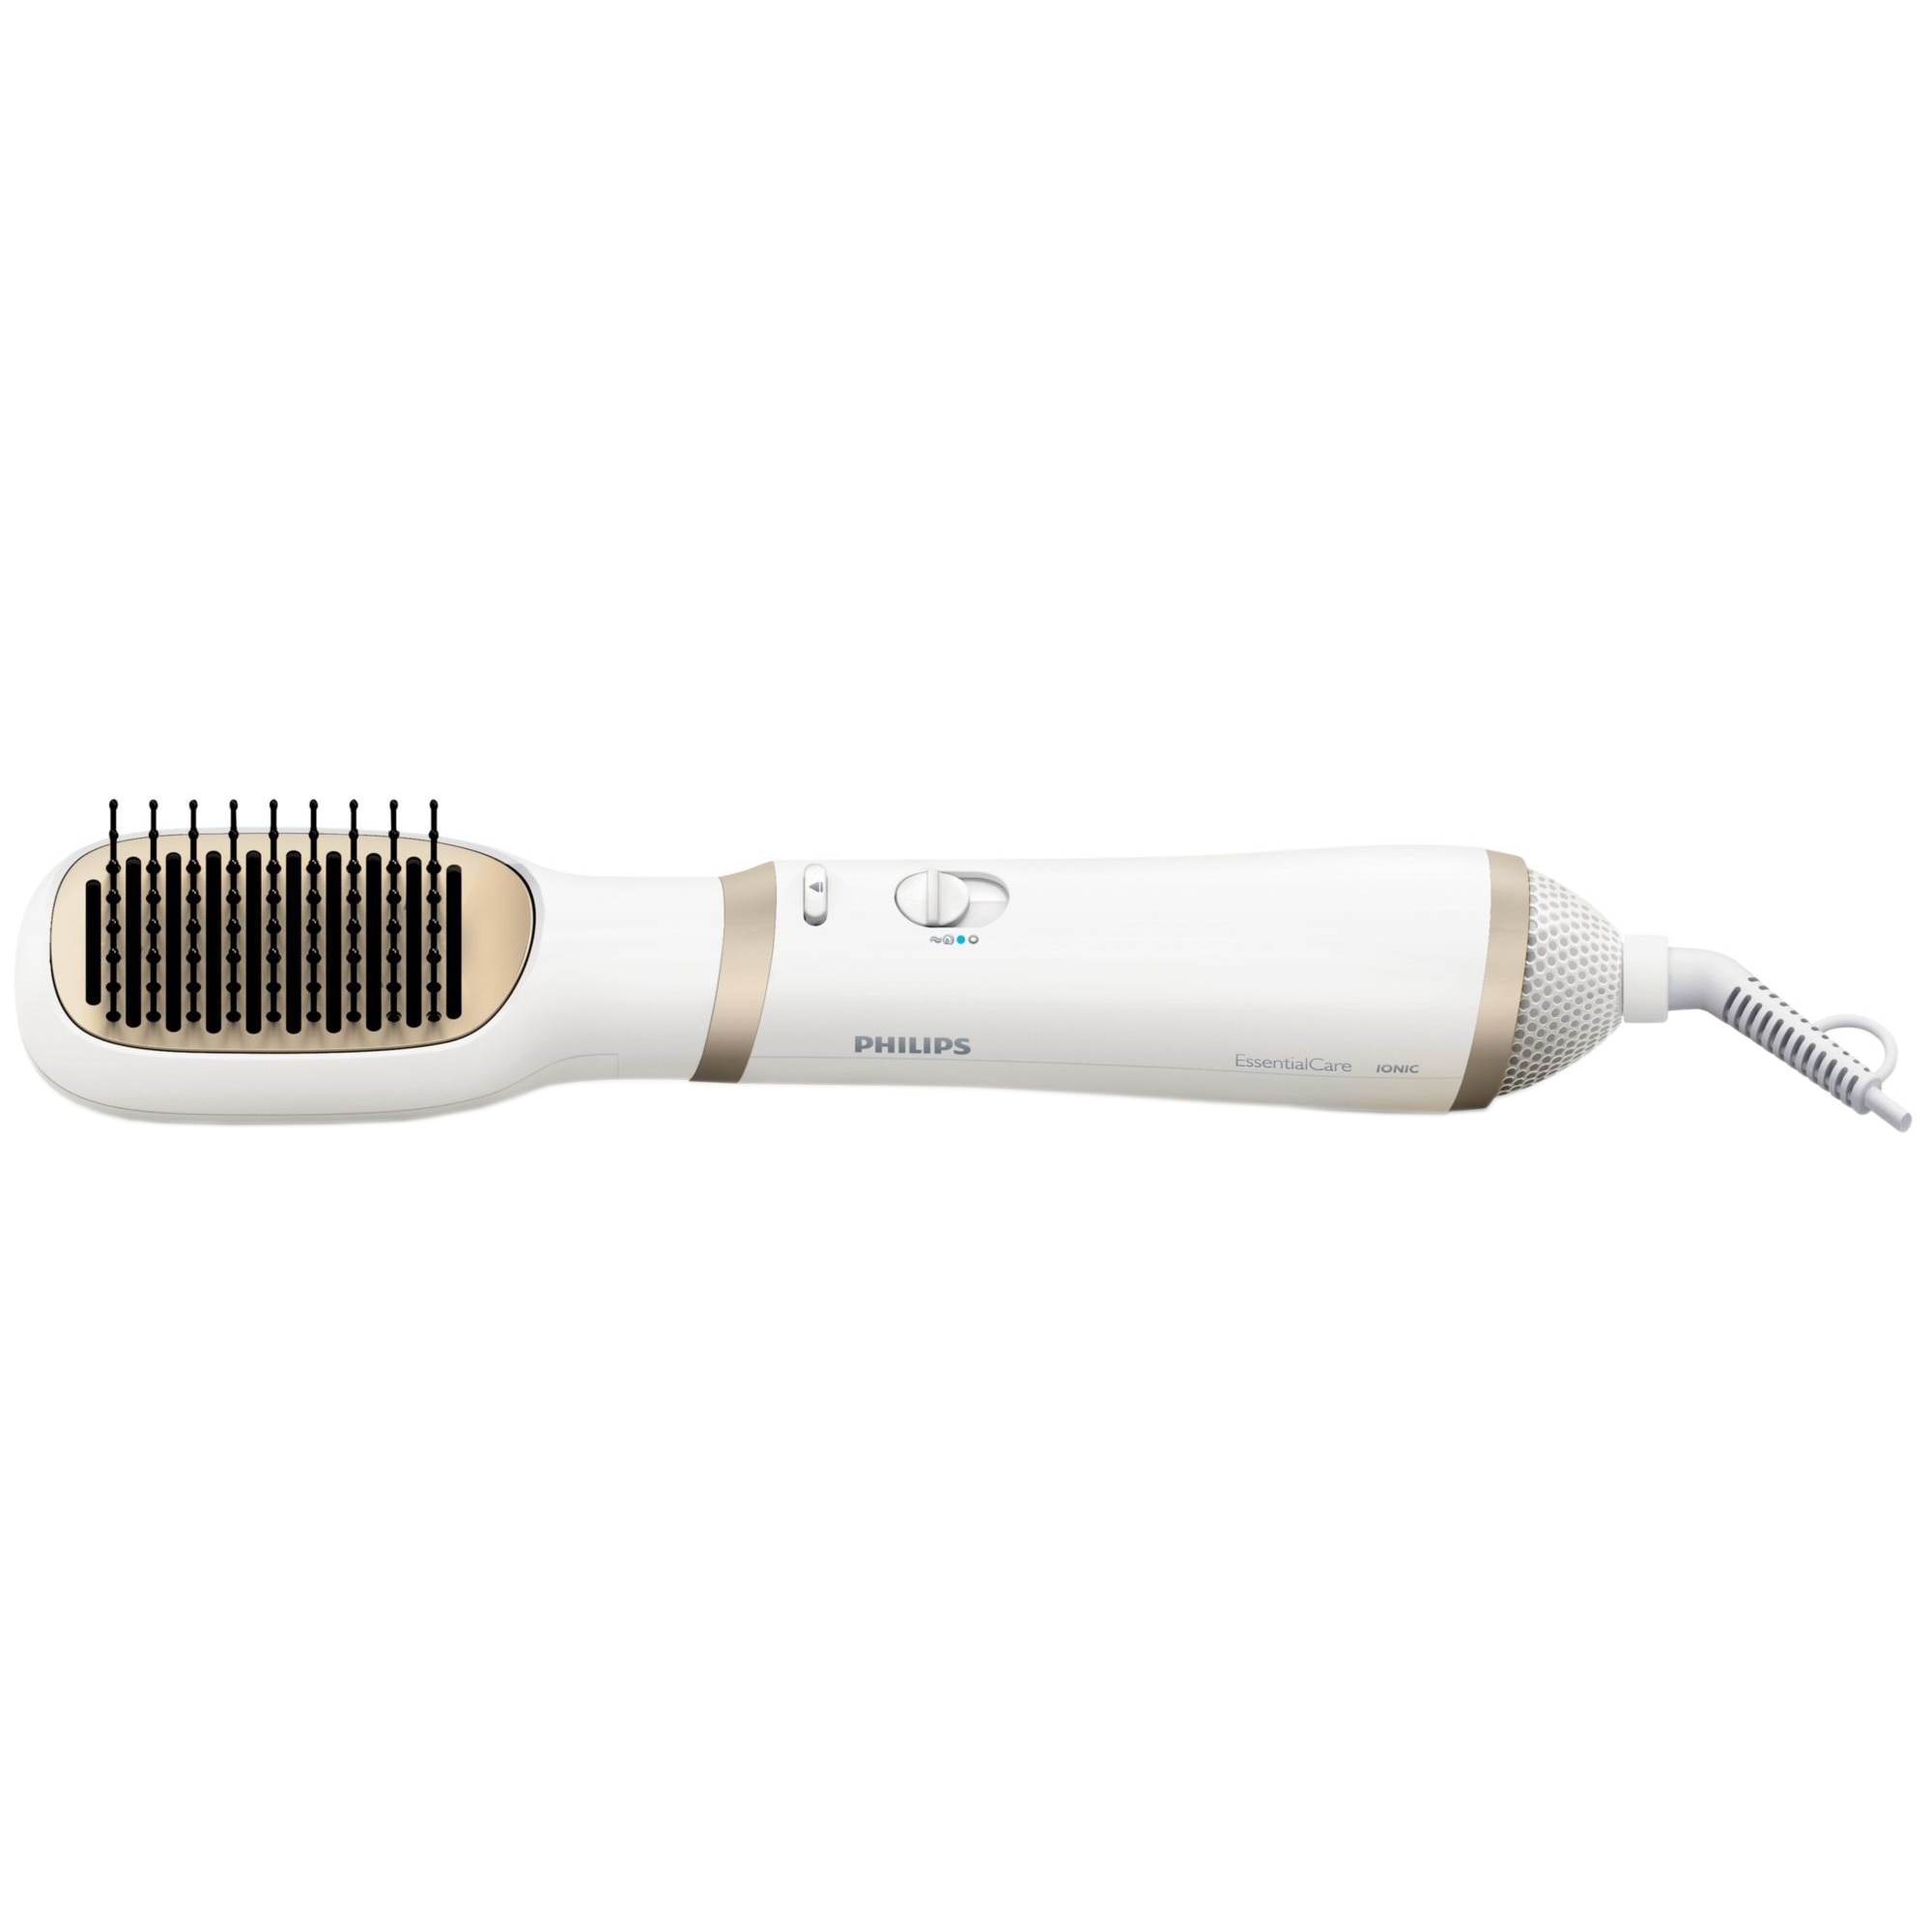 Get cold Northwest Appal Perie cu aer cald Philips Essential Care Airstyler HP8663/00, 800 W,  Ionizare, ThermoProtect, 4 accesorii, Alb - eMAG.ro